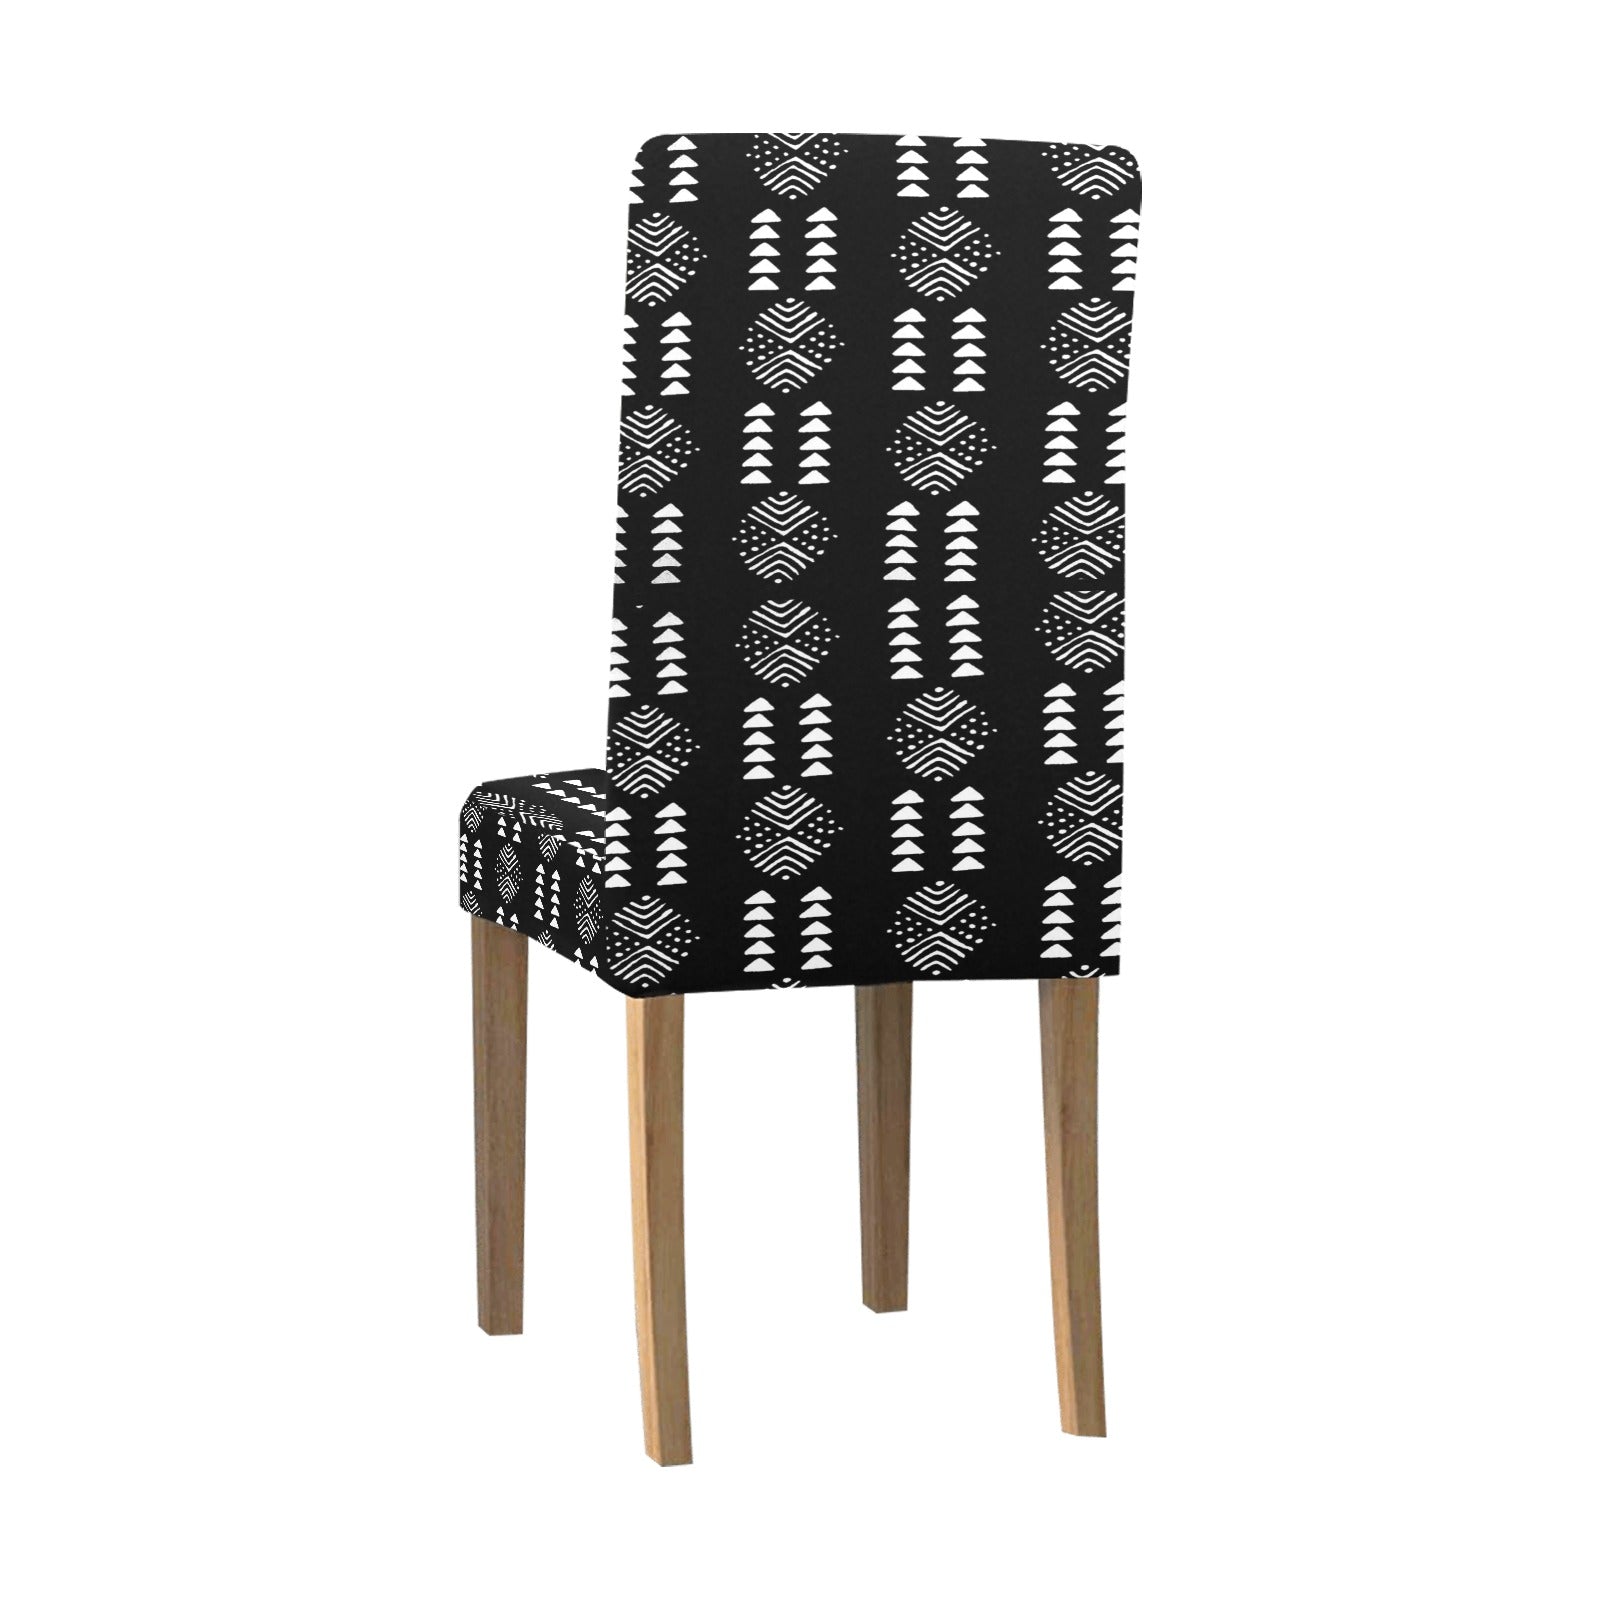 African Tribal Print Removable Chair Cover - Bynelo